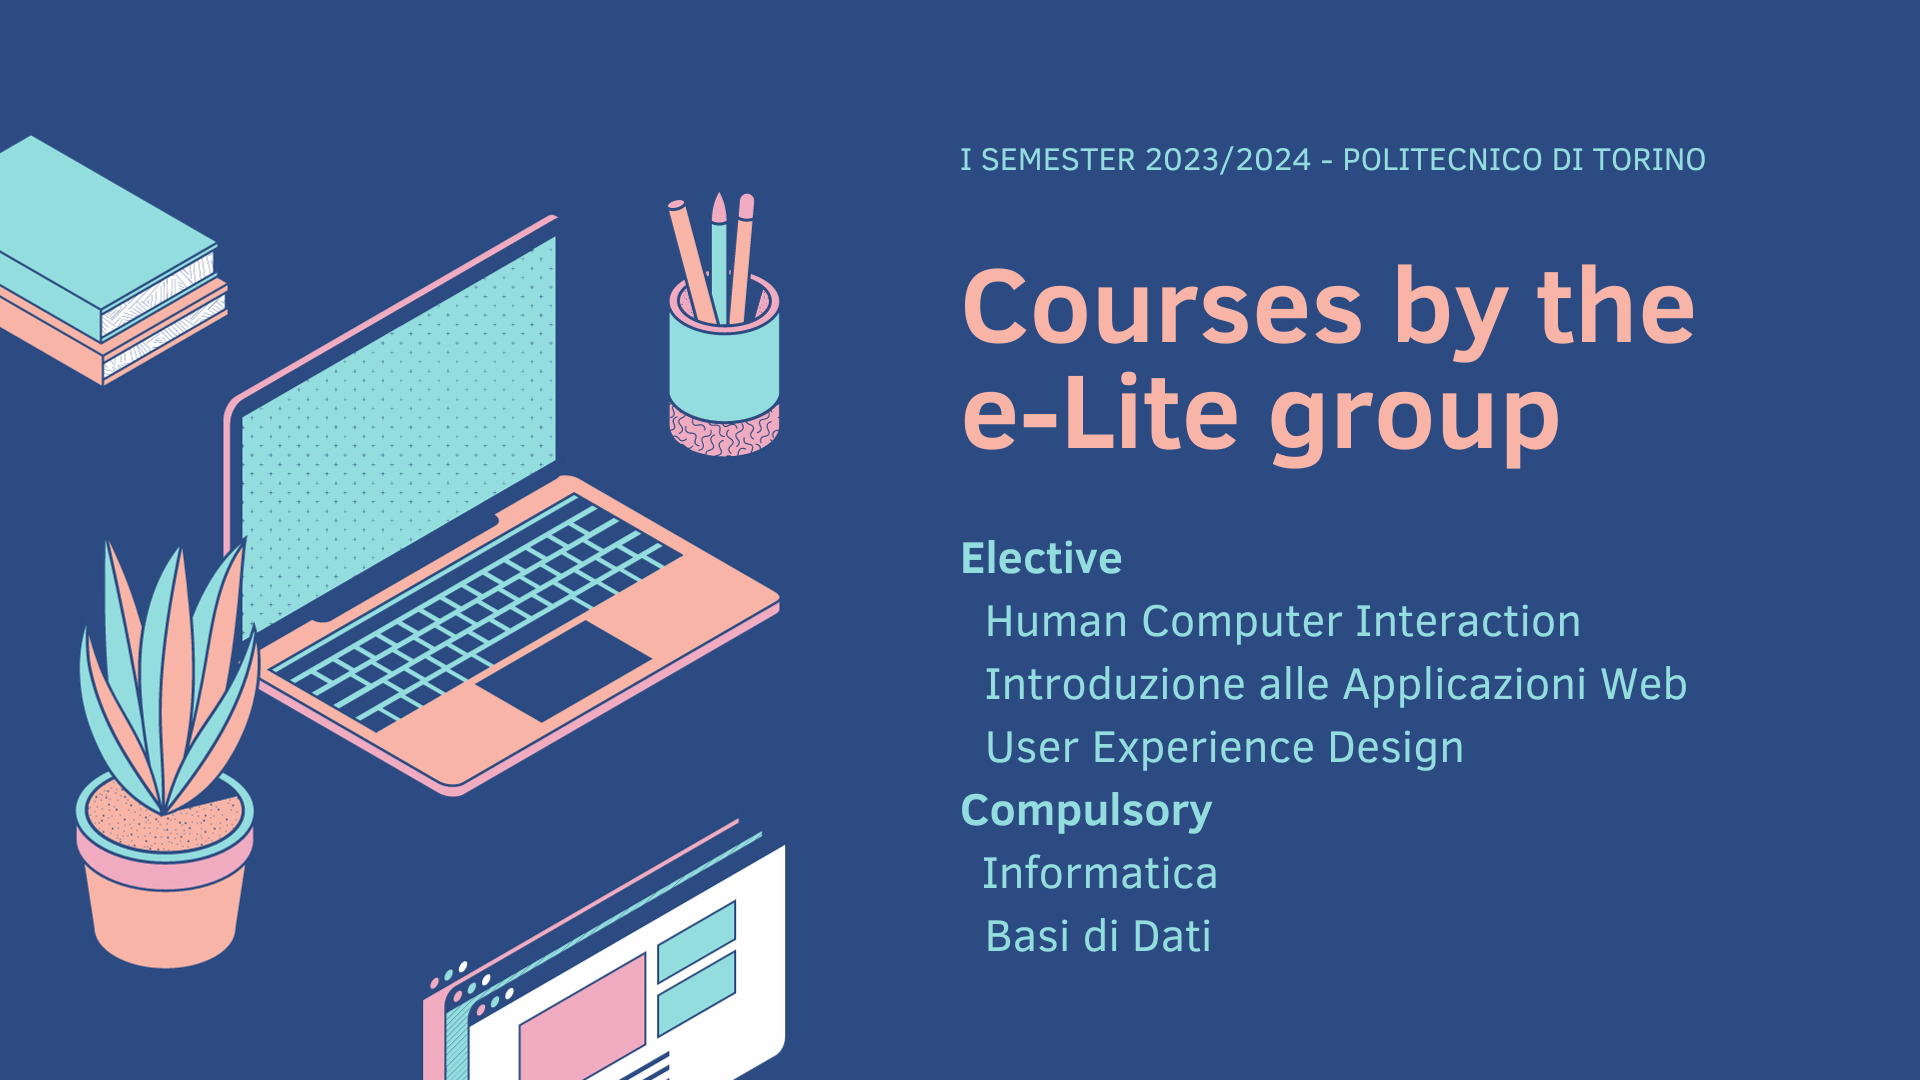 Overview of the courses by the e-Lite group members